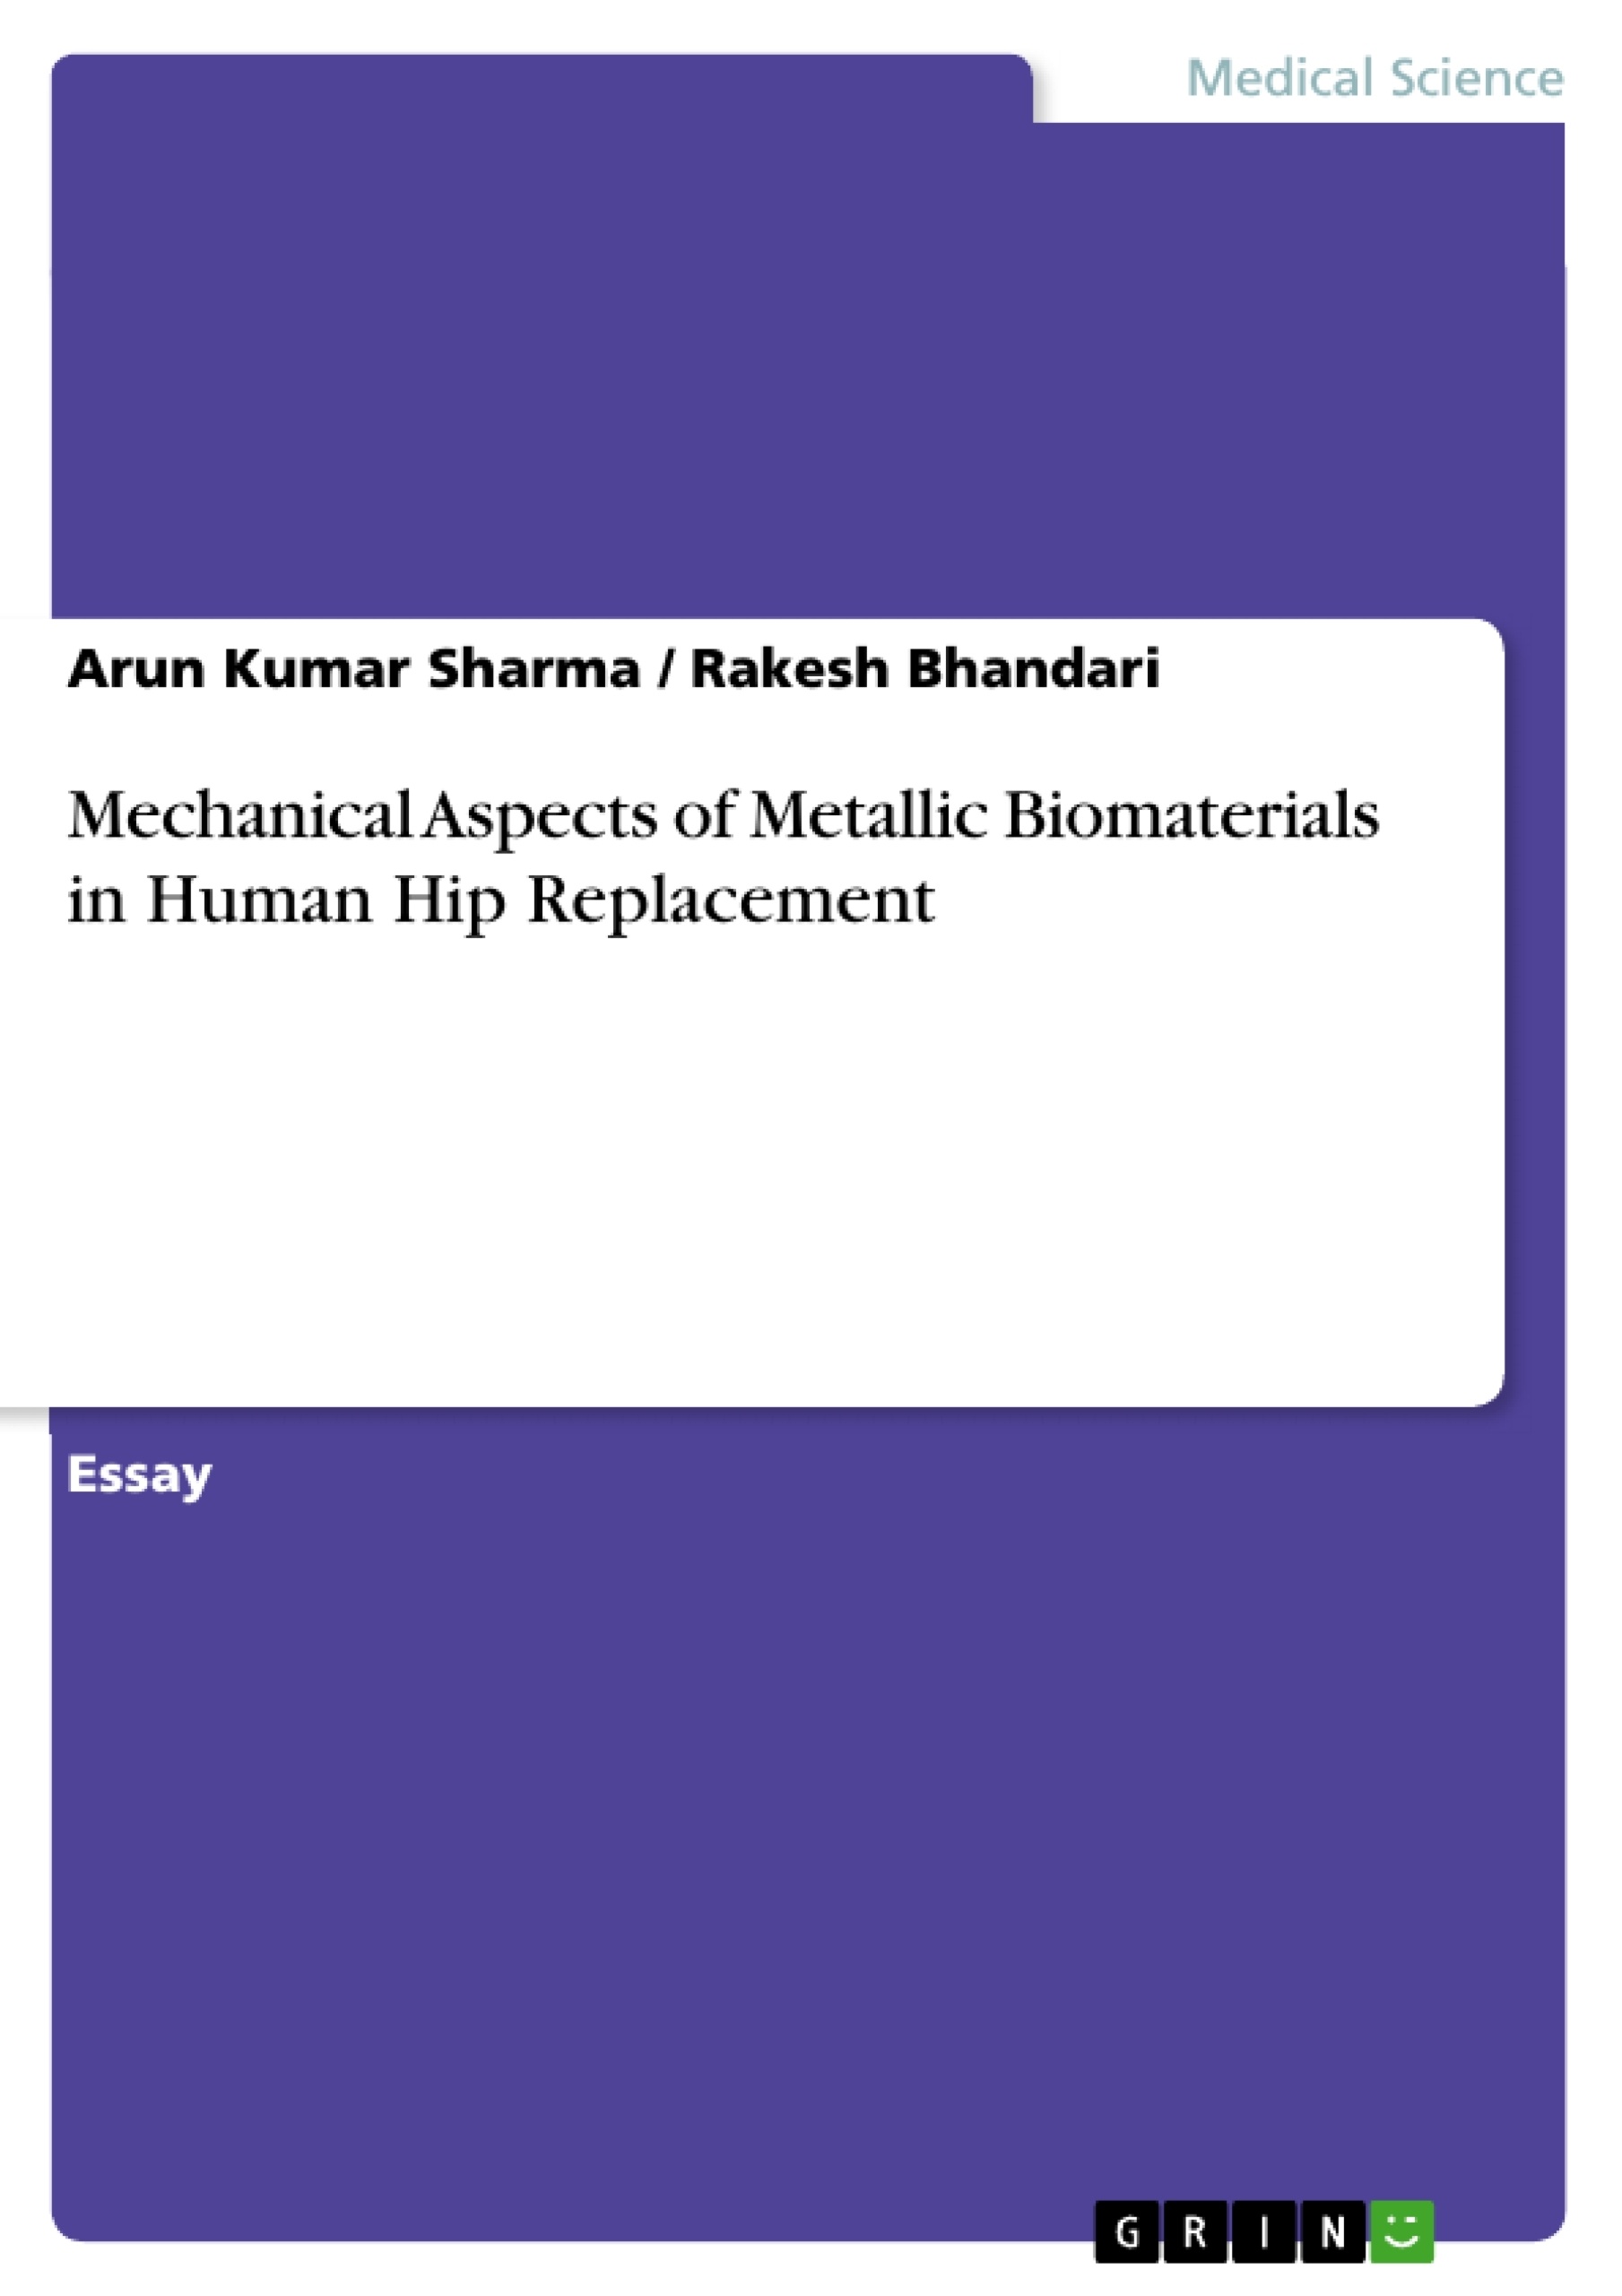 Título: Mechanical Aspects of Metallic Biomaterials in Human Hip Replacement